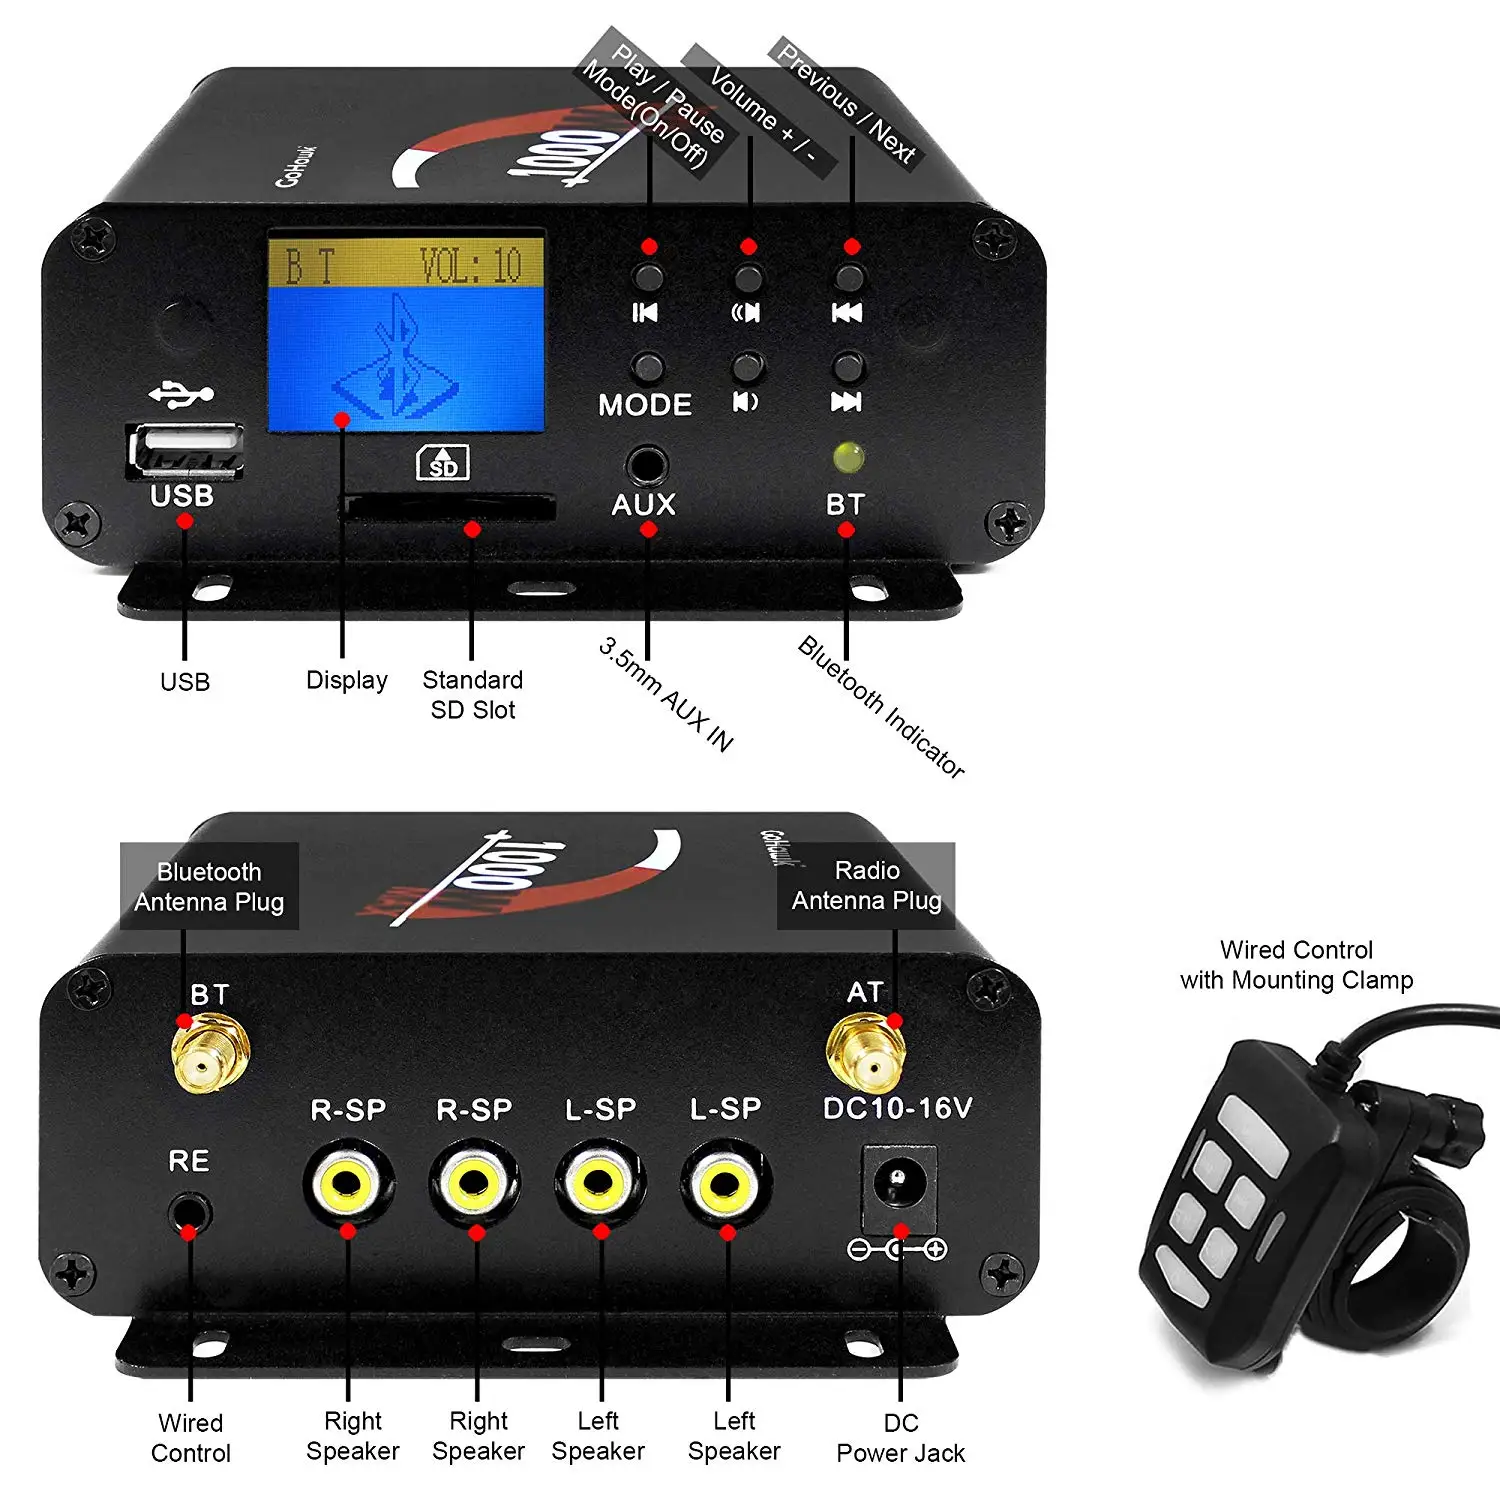 1000W Amplifier M1000 Bluetooth Motorcycle Stereo 4 Speakers MP3 Audio FM Radio System for Motorcycles/ATV/UTV/Boat